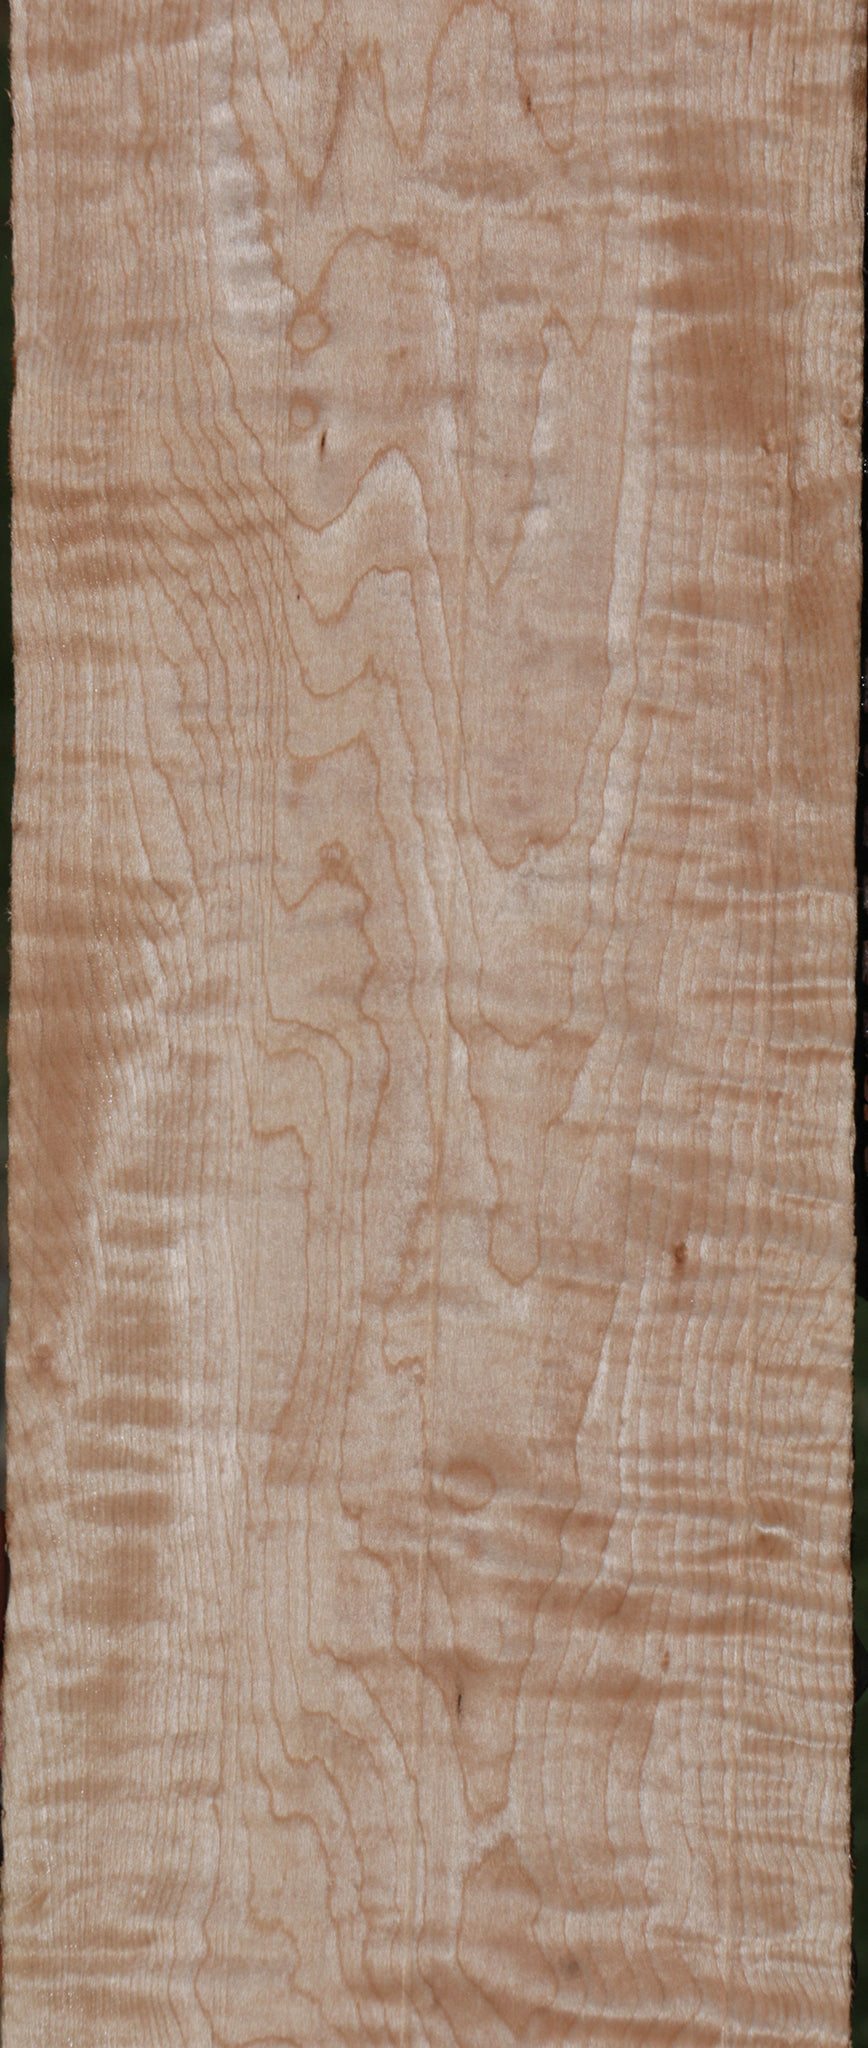 Extra Fancy Curly Eastern Red Maple Lumber